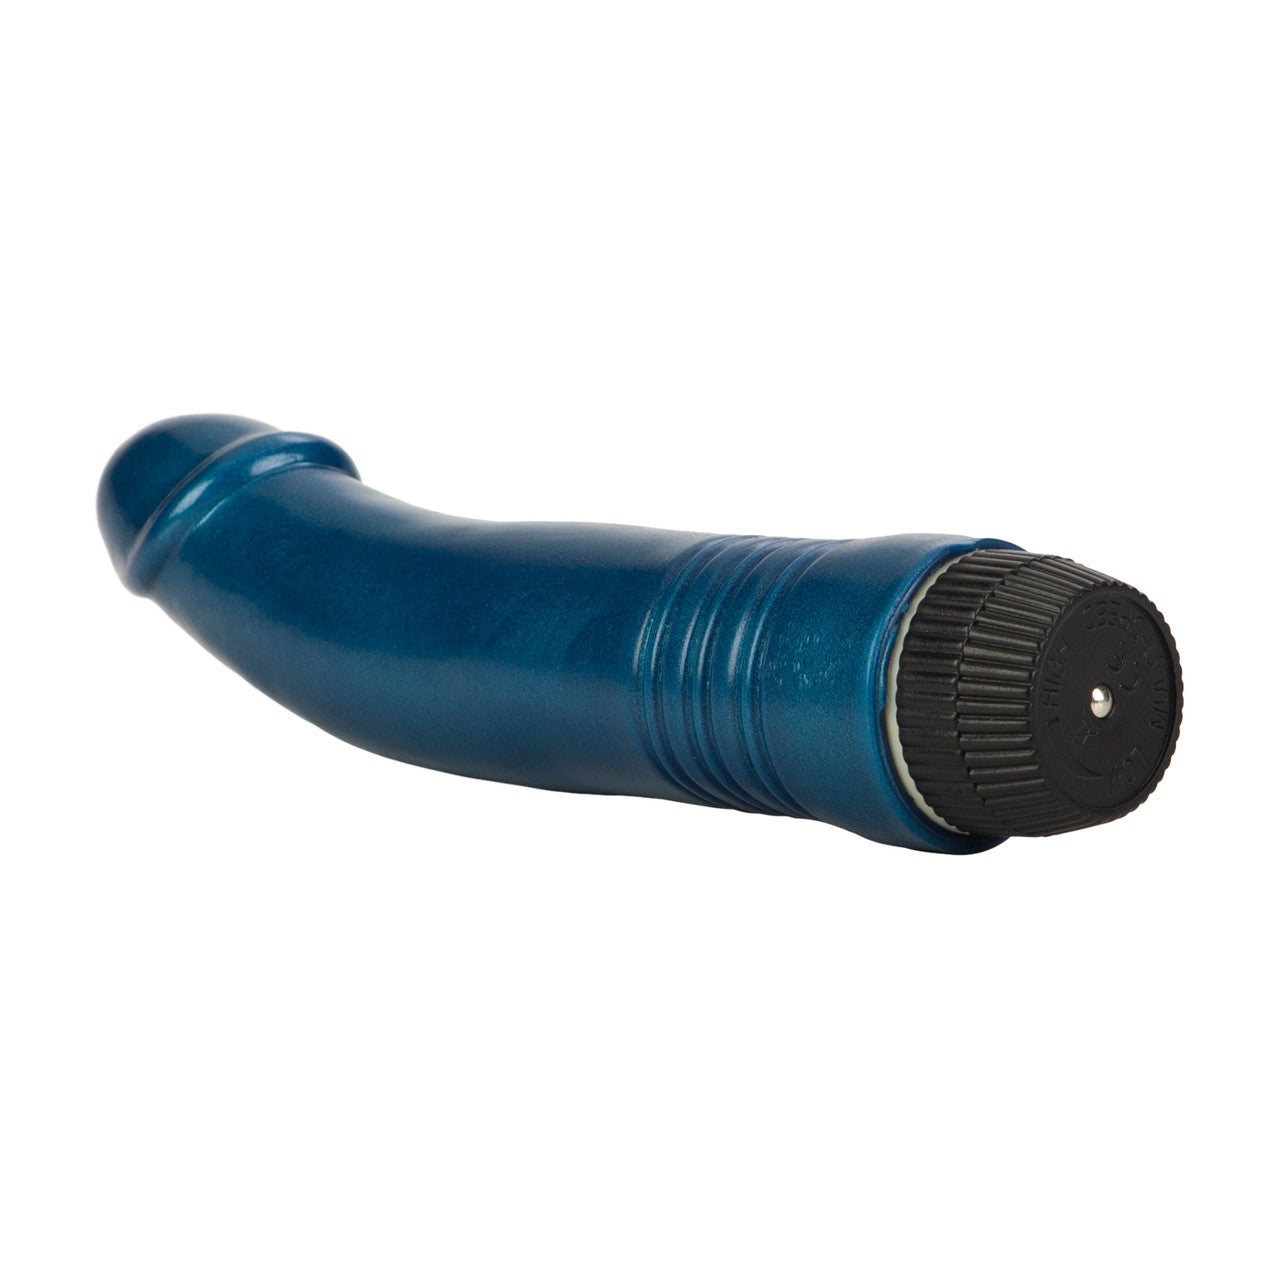 Midnight G Spot Vibe - Thorn & Feather Sex Toy Canada